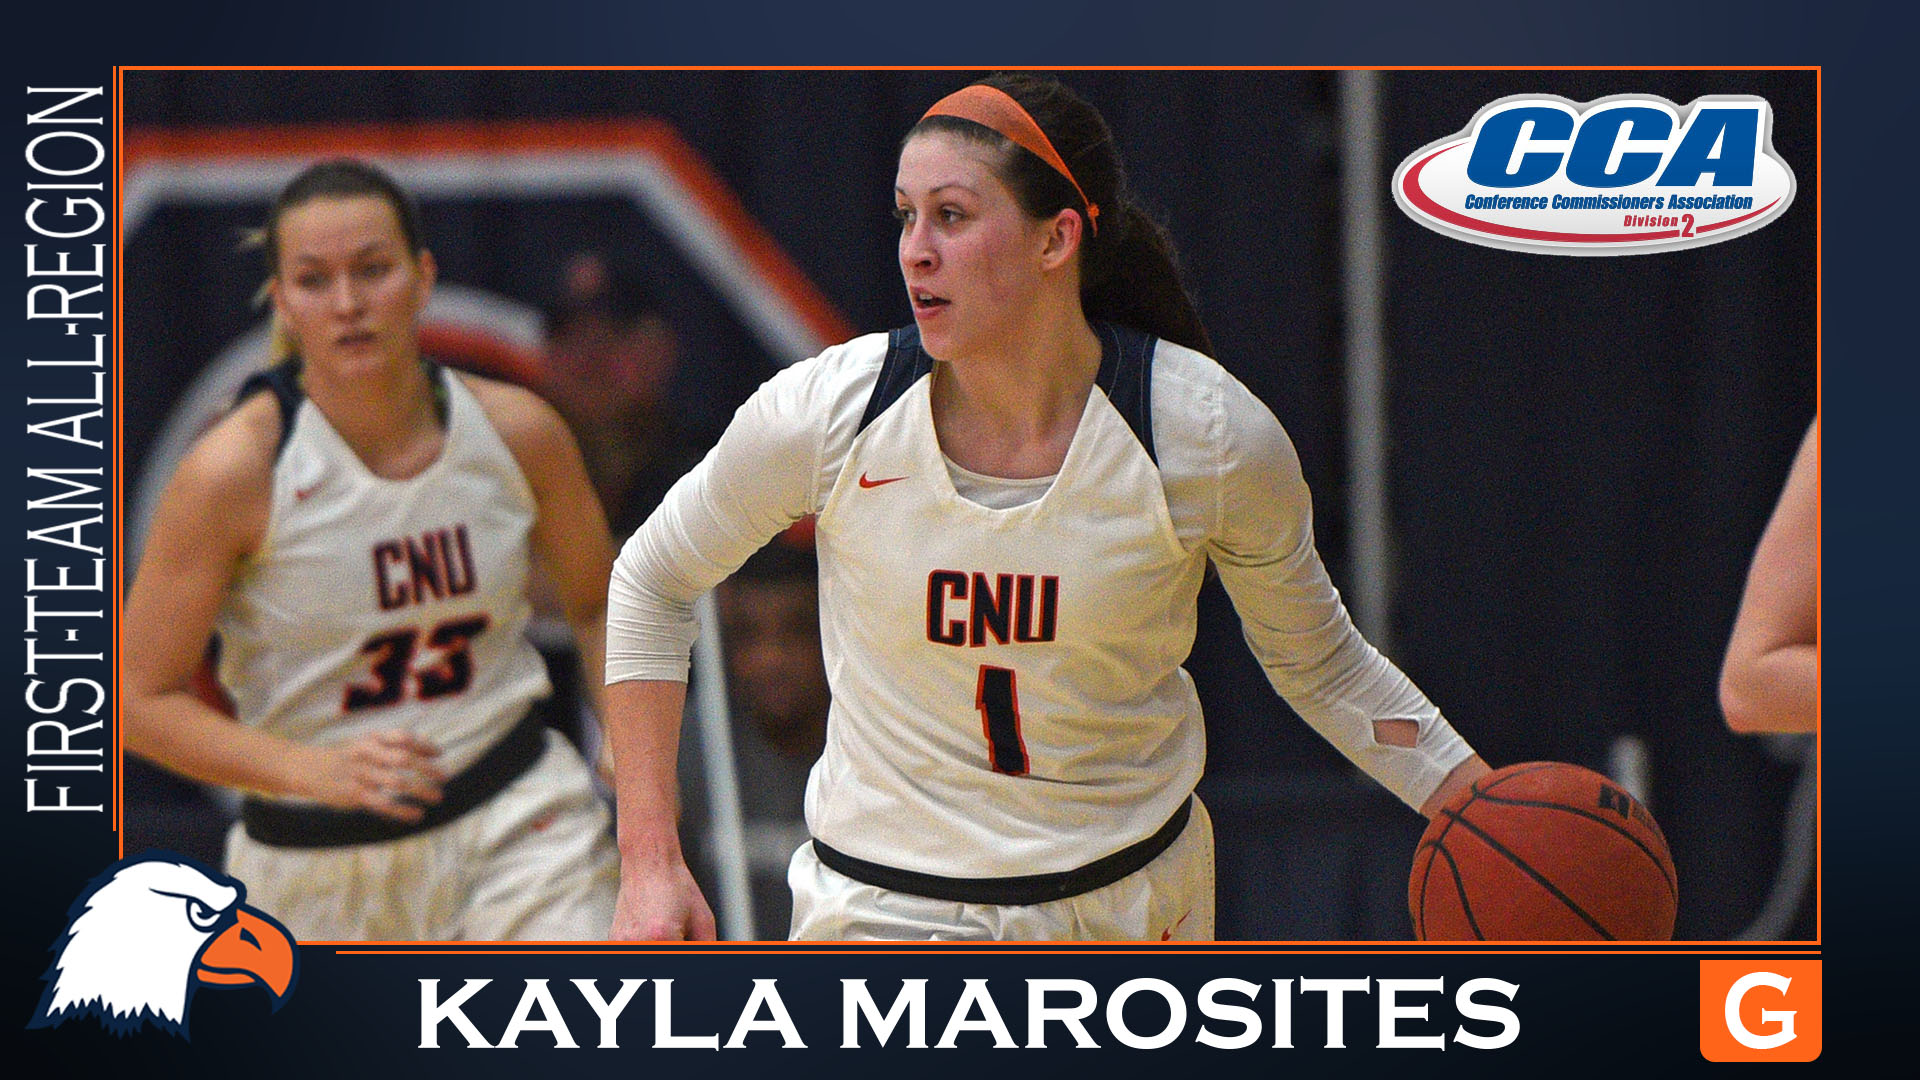 Marosites and Wykle given D2CCA all-region plaudits